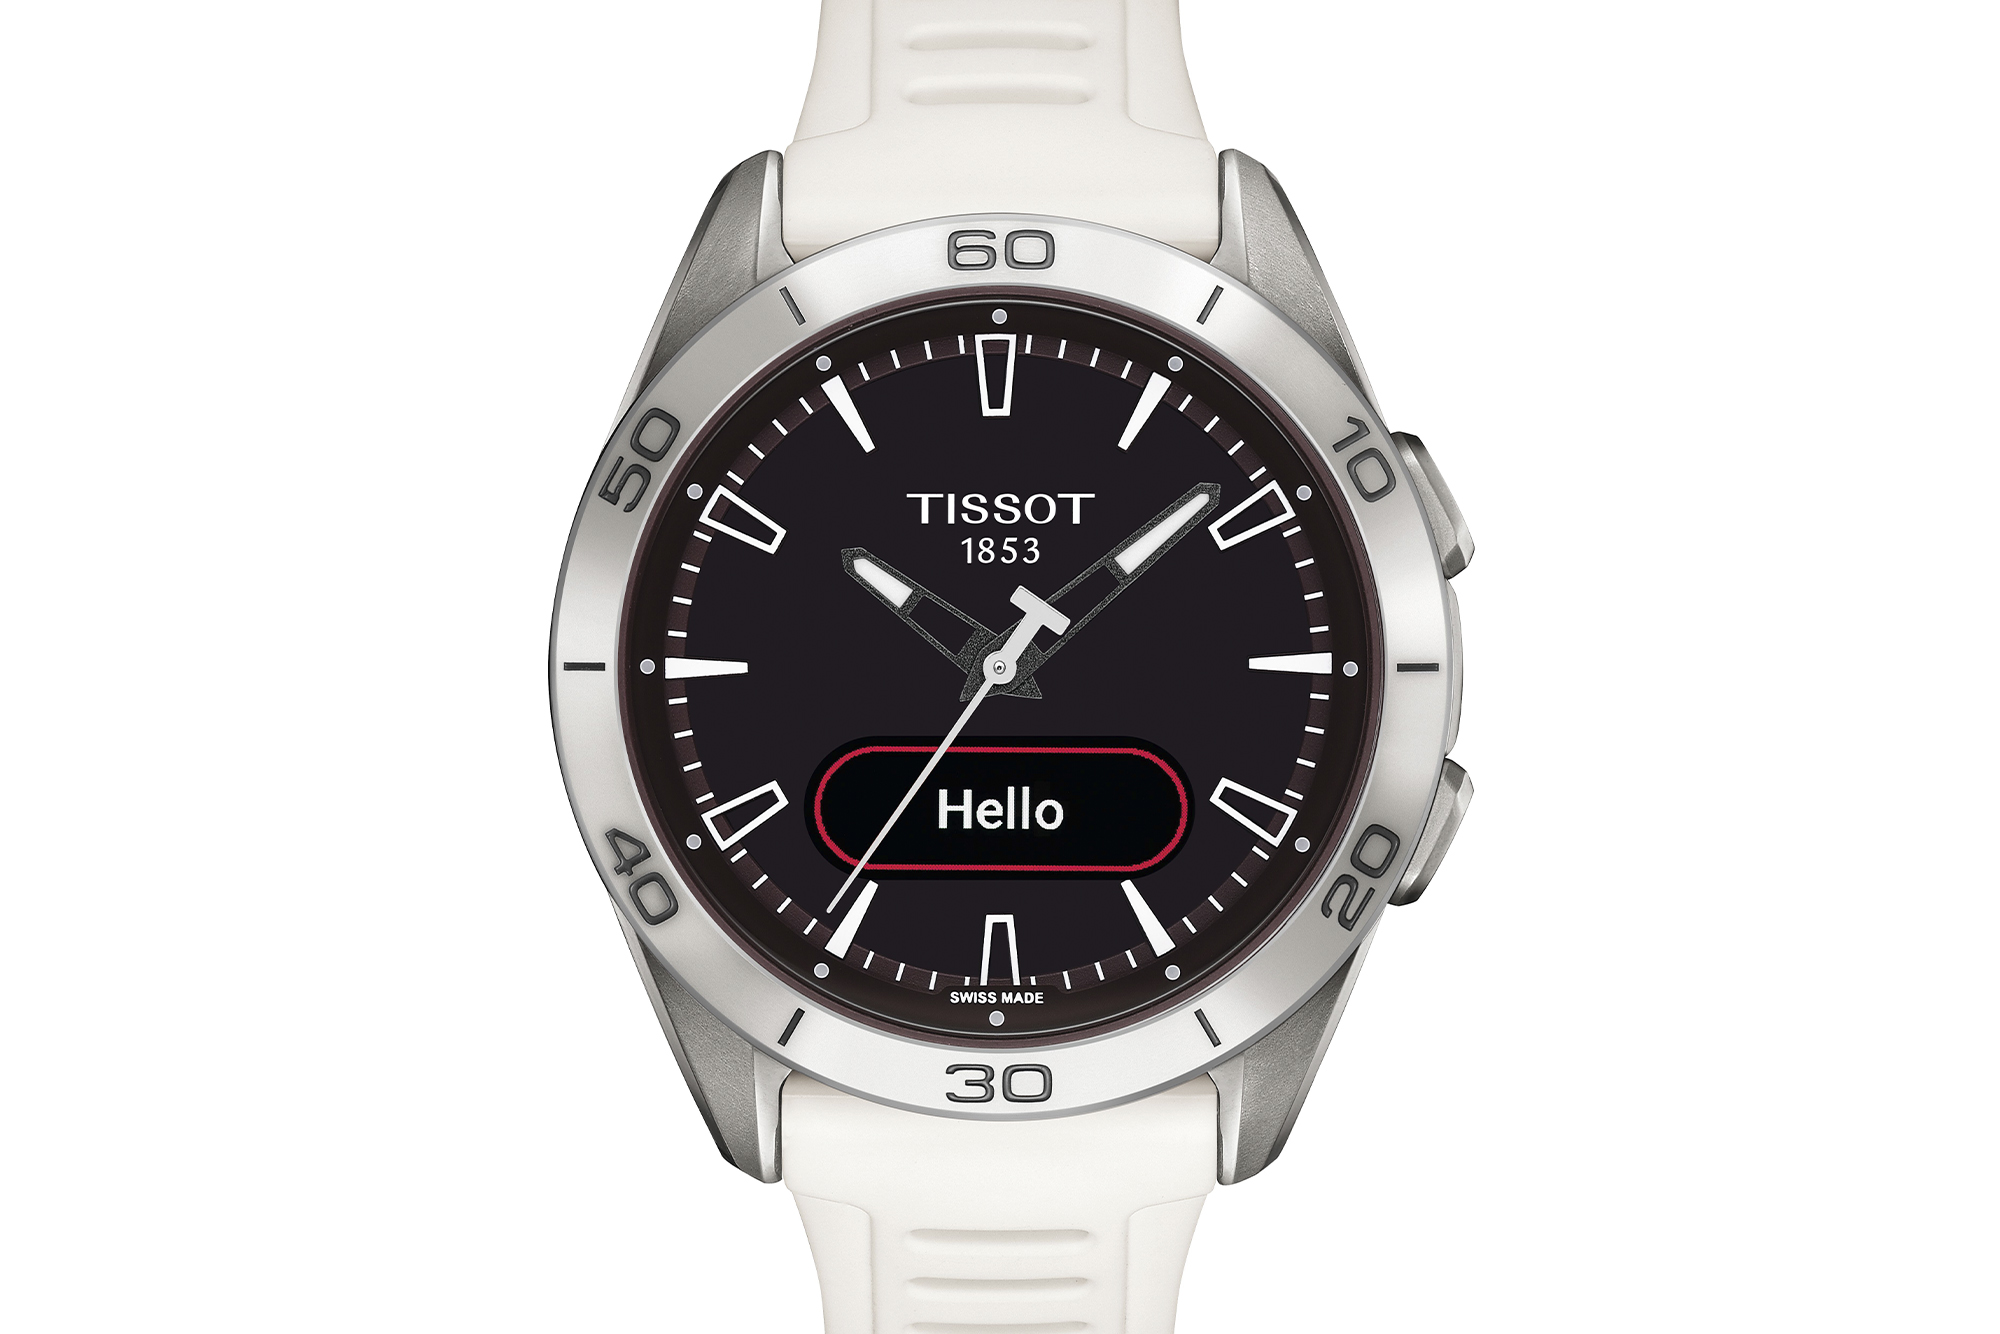 TISSOT T-TOUCH CONNECT SPORT